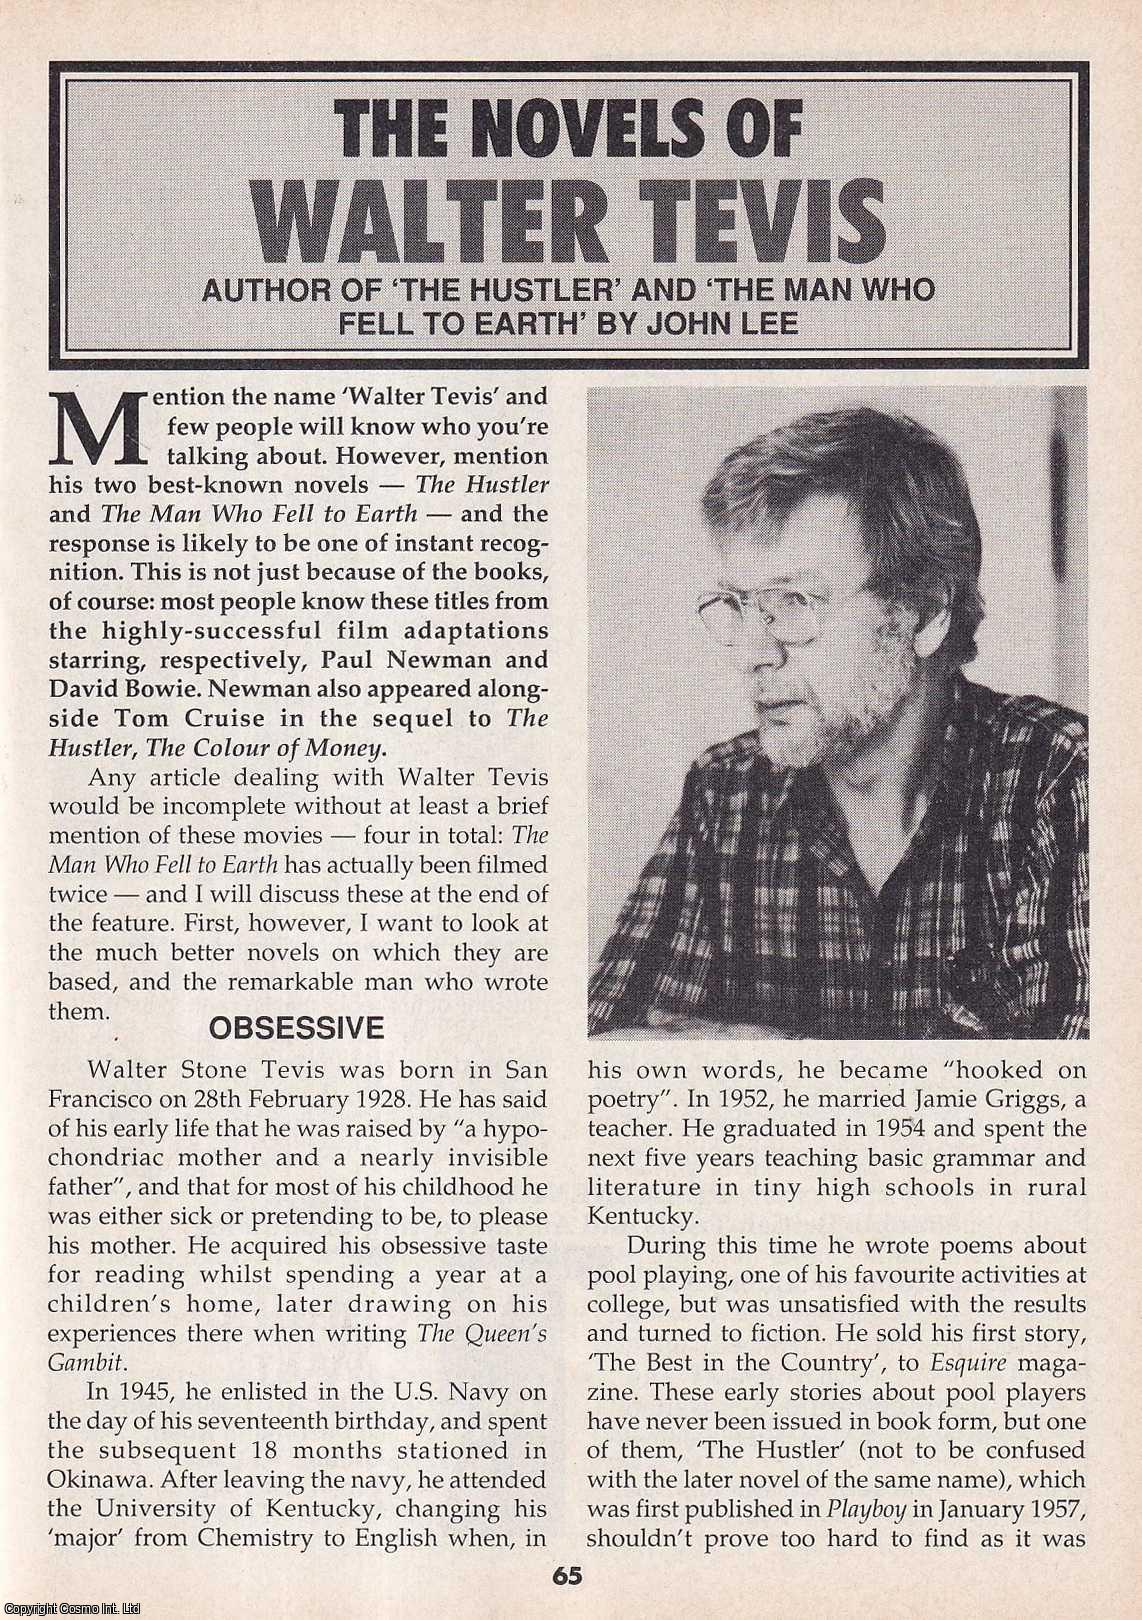 John Lee - The Novels of Walter Tevis. Author of The Hustler. This is an original article separated from an issue of The Book & Magazine Collector publication.